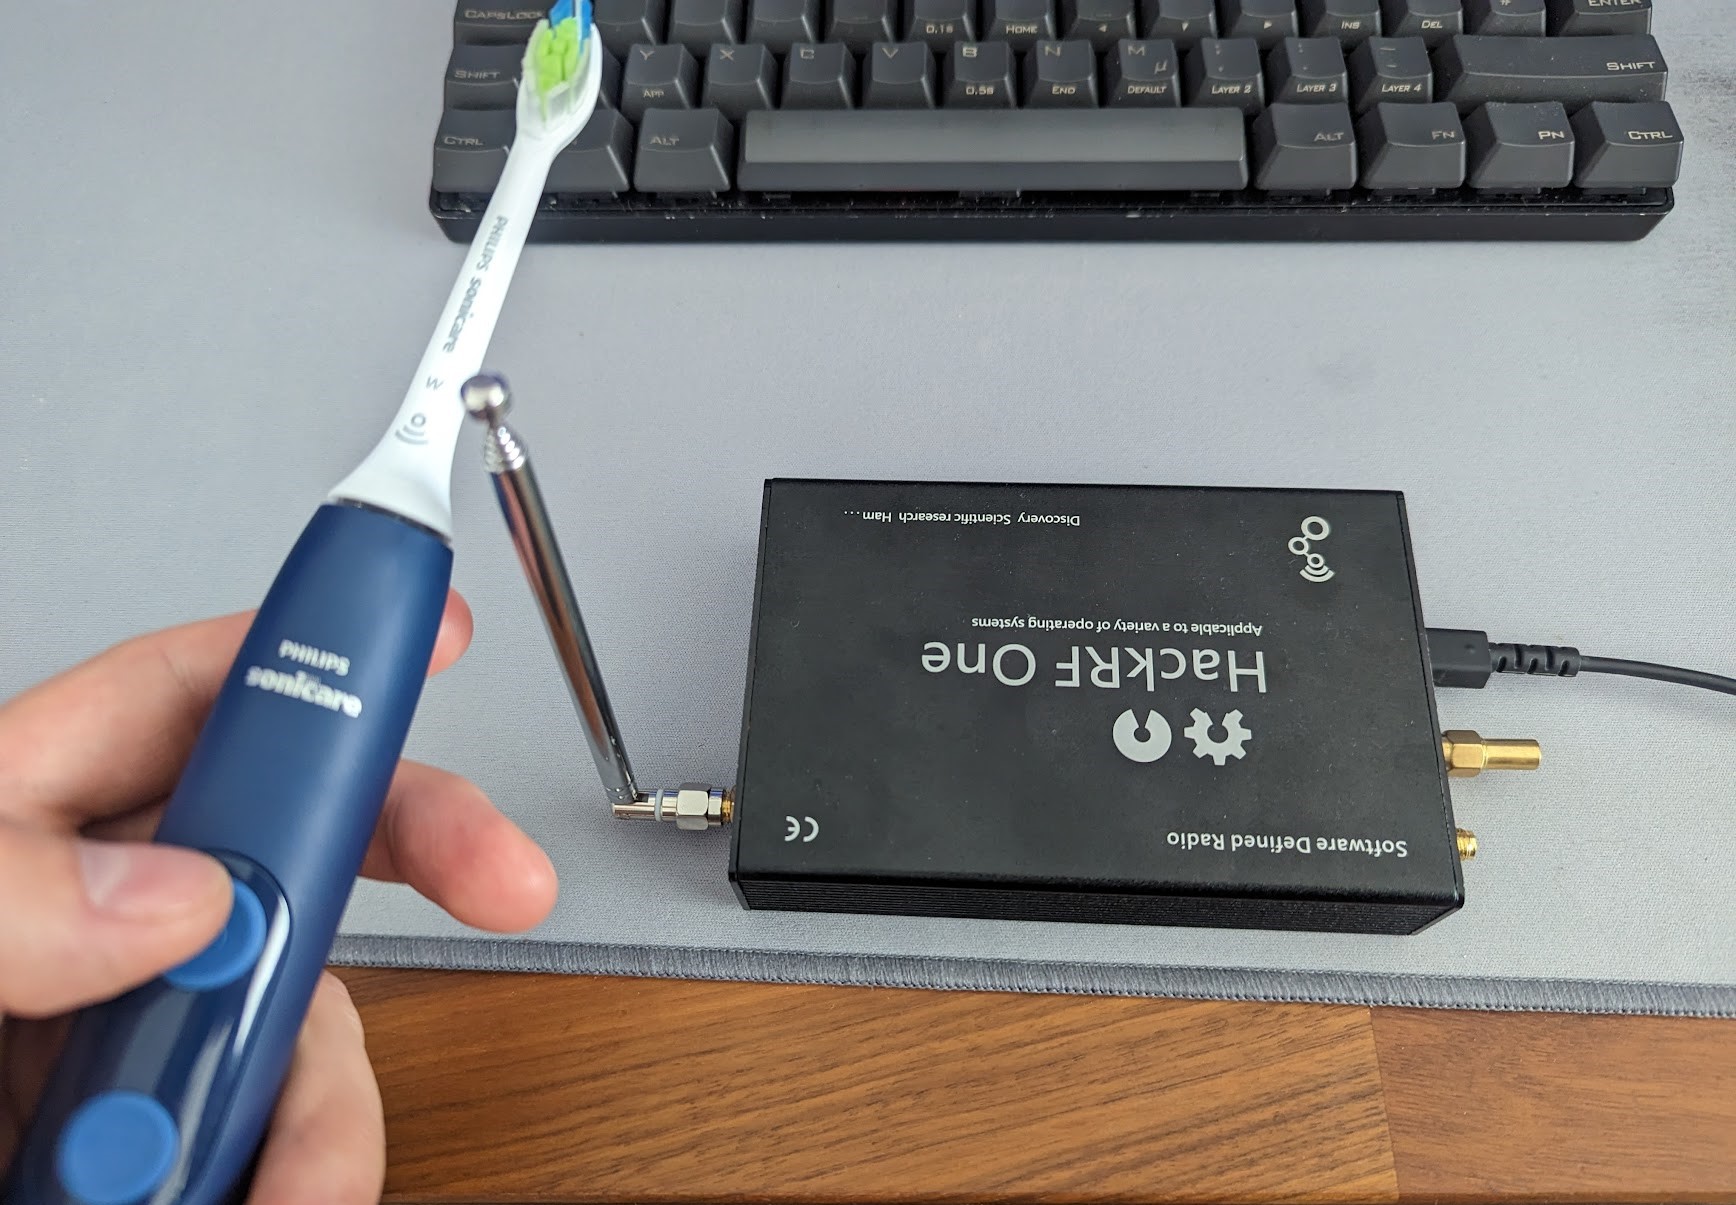 Hacking A “Smart” Electric Toothbrush To Reset Its Usage Counter